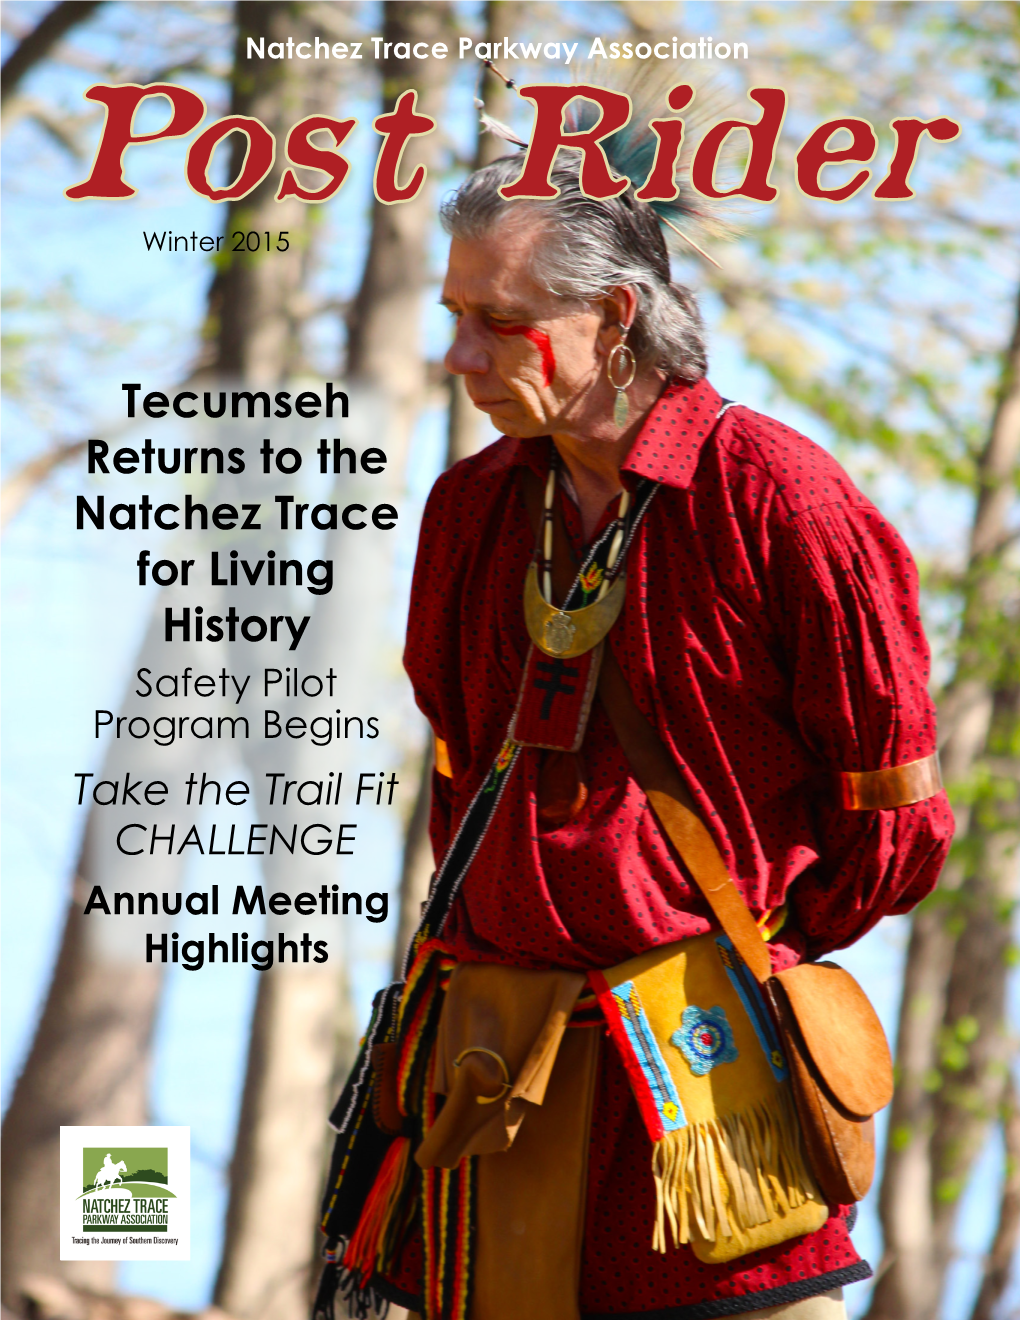 Tecumseh Returns to the Natchez Trace for Living History